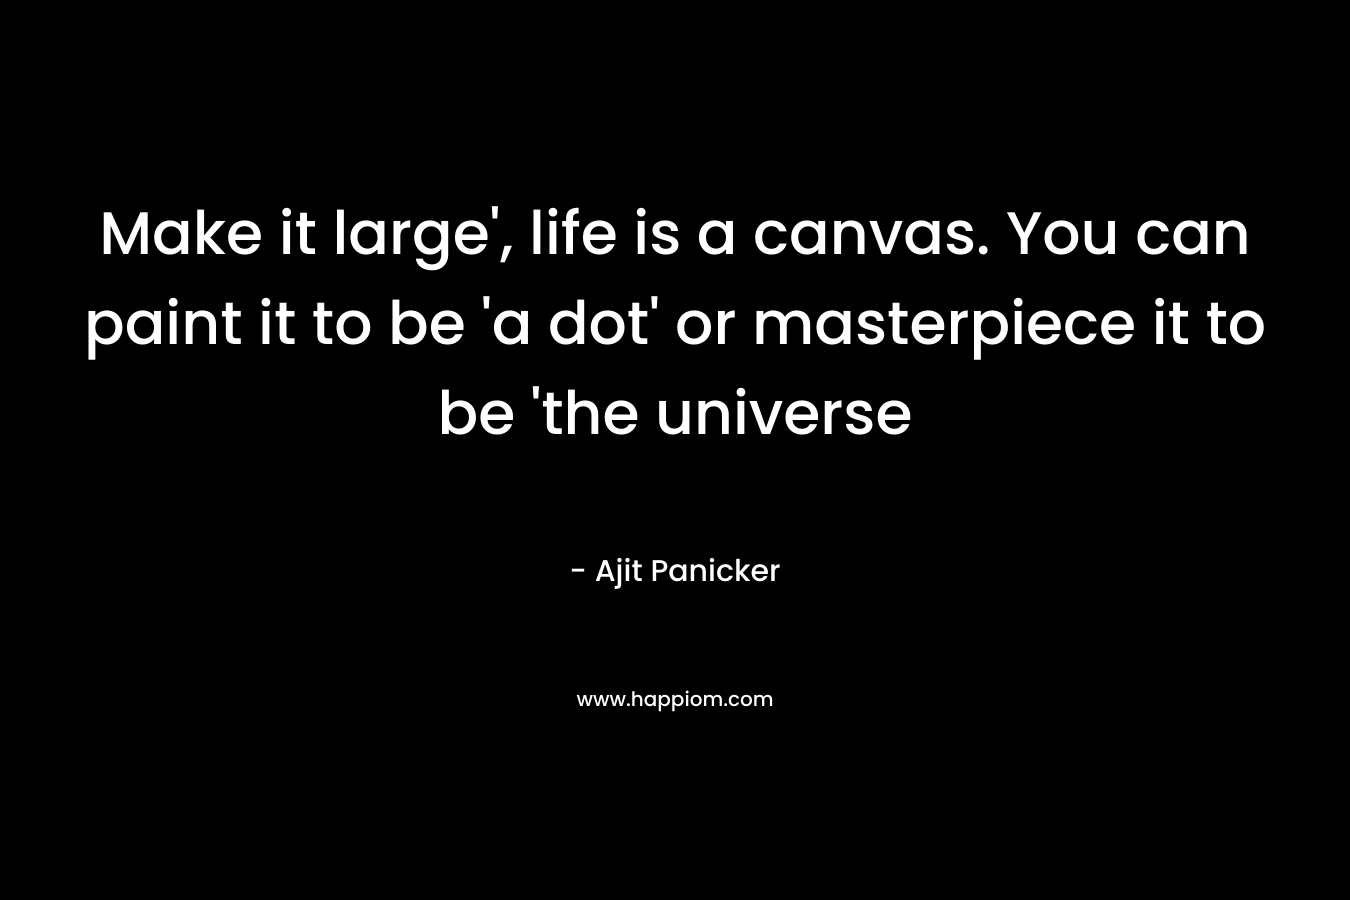 Make it large', life is a canvas. You can paint it to be 'a dot' or masterpiece it to be 'the universe